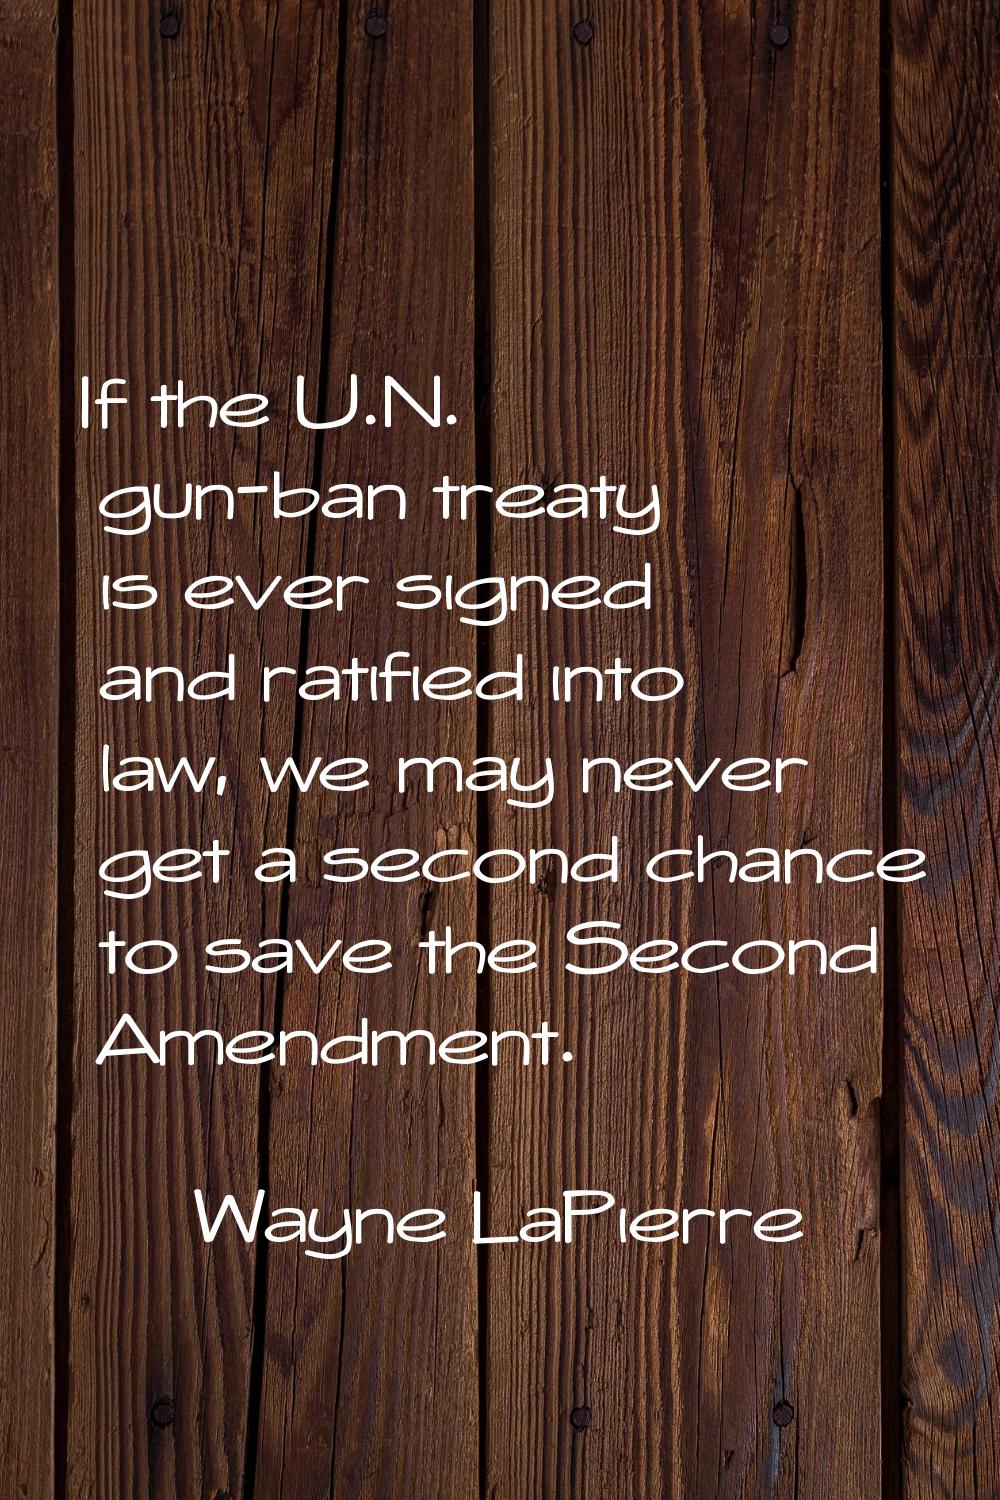 If the U.N. gun-ban treaty is ever signed and ratified into law, we may never get a second chance t